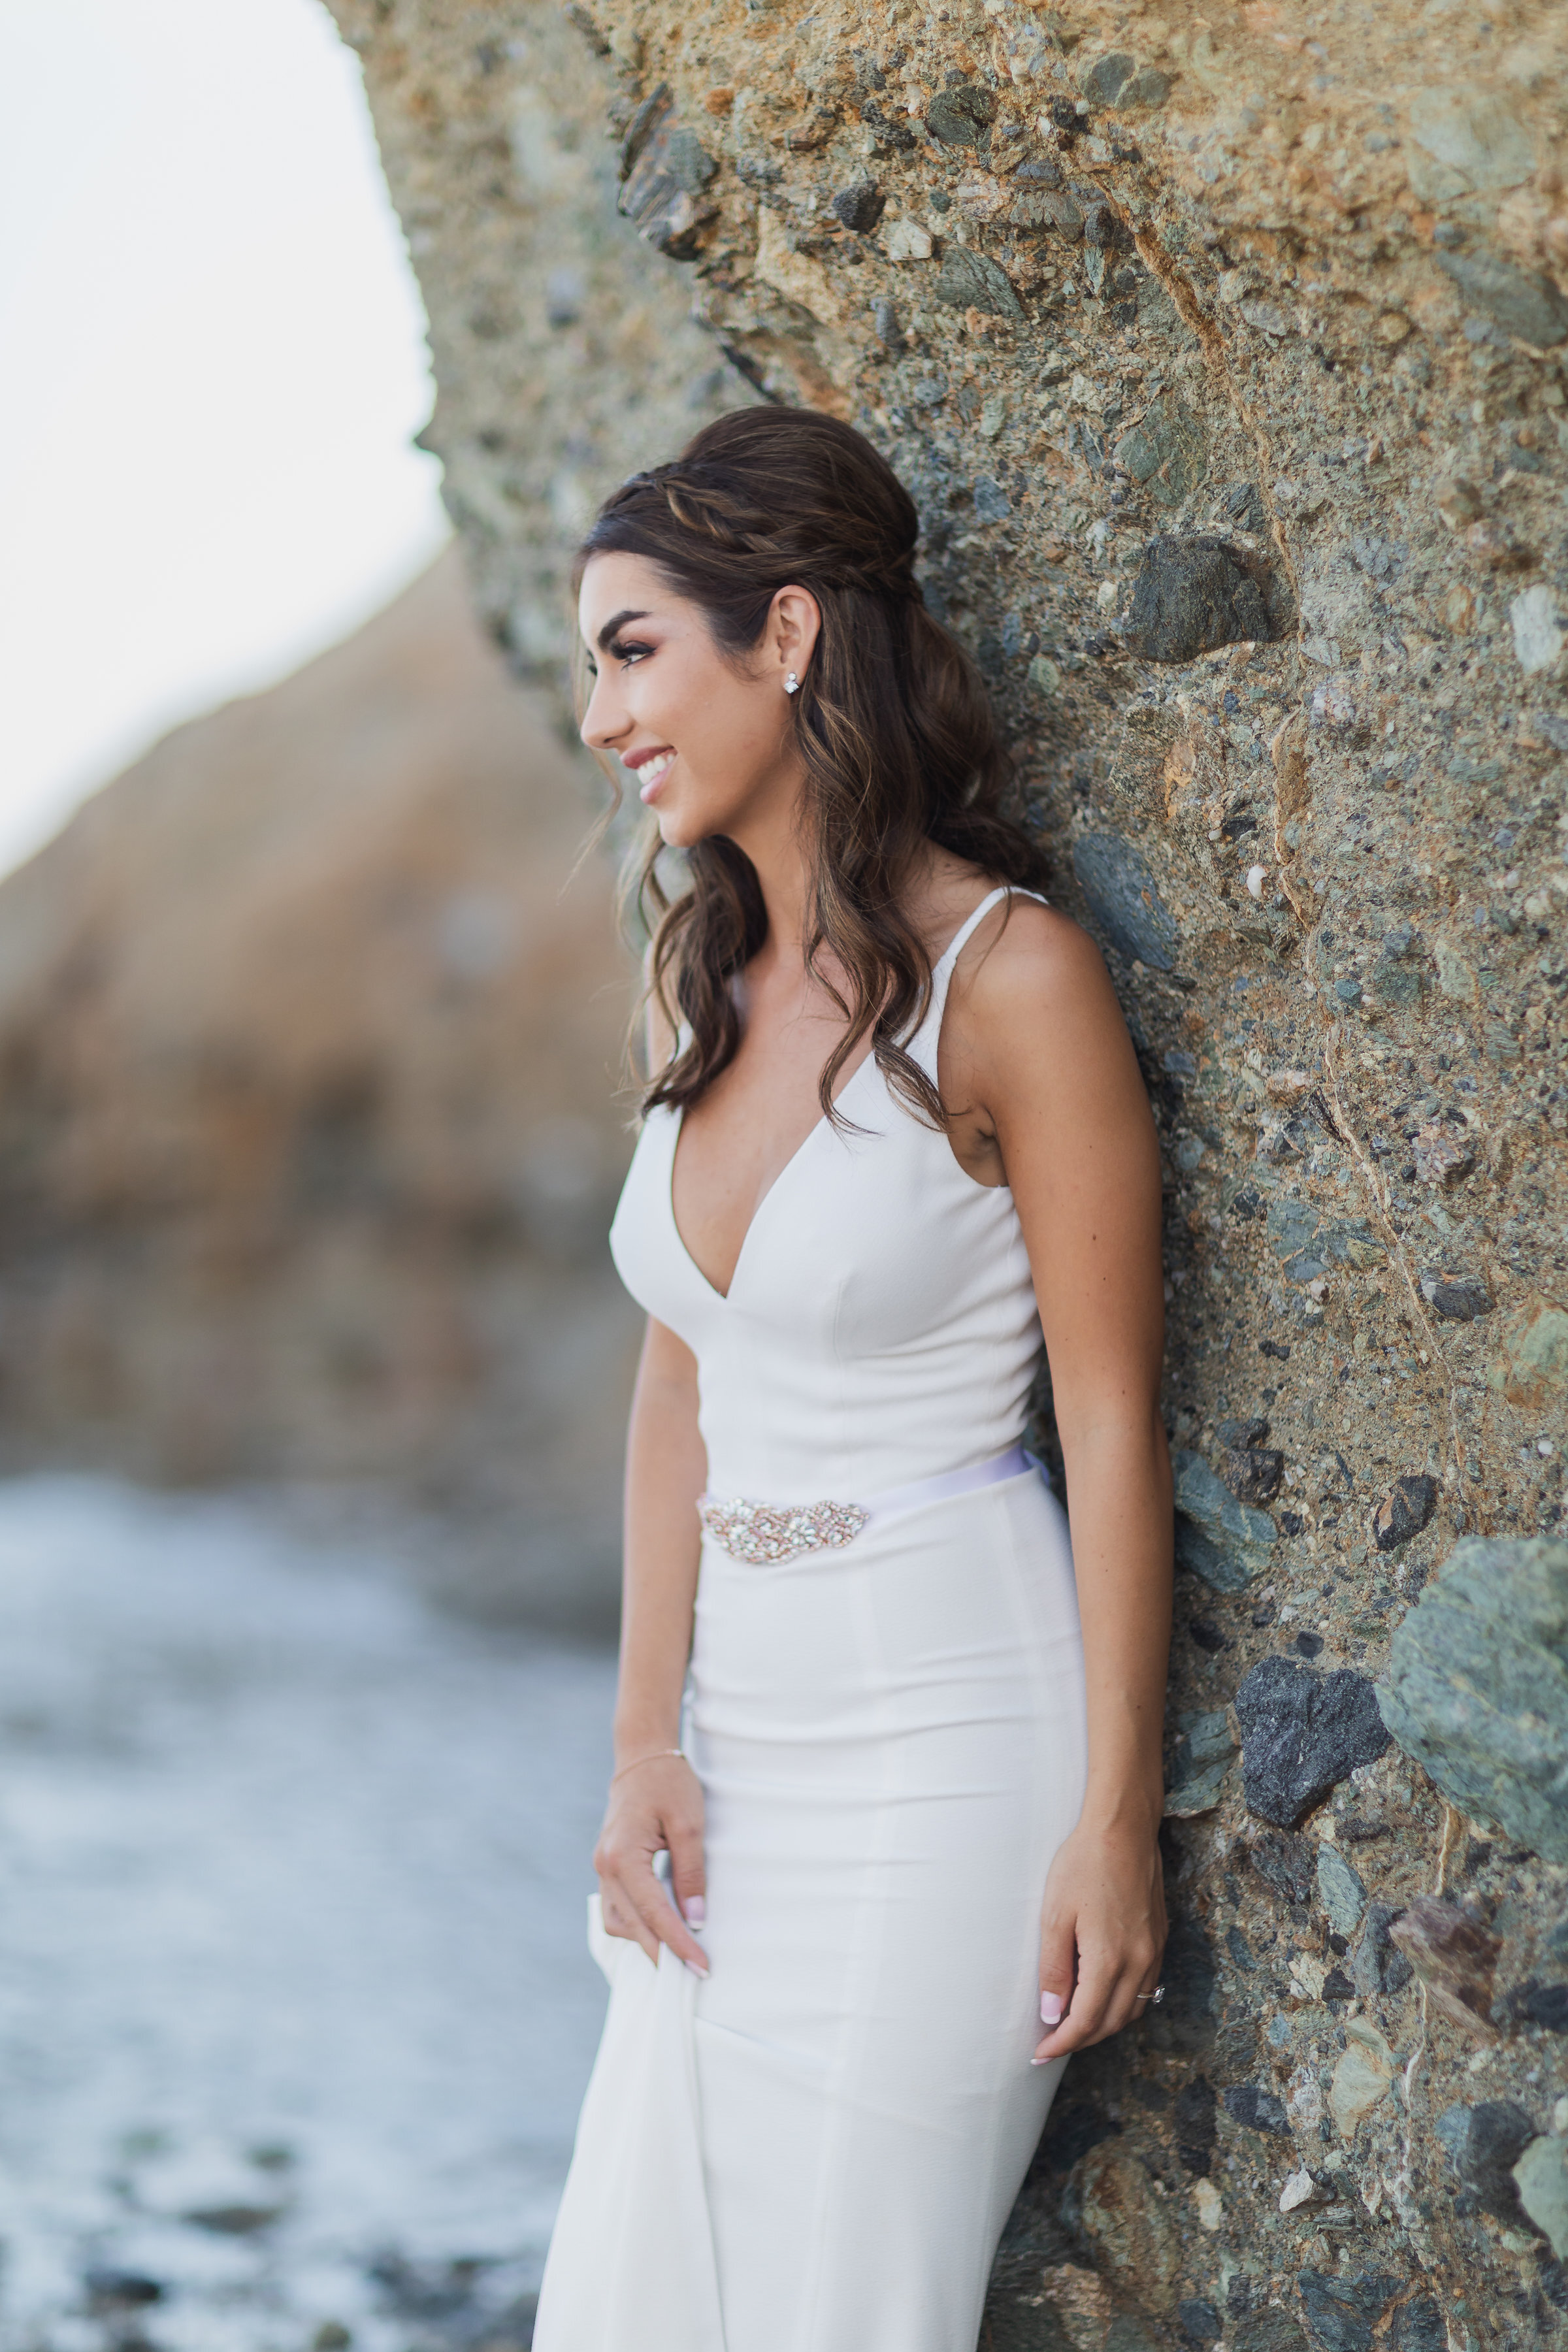 Photo of Beautiful Bride in a simple white wedding form fitting dress on the rocky beach.jpg